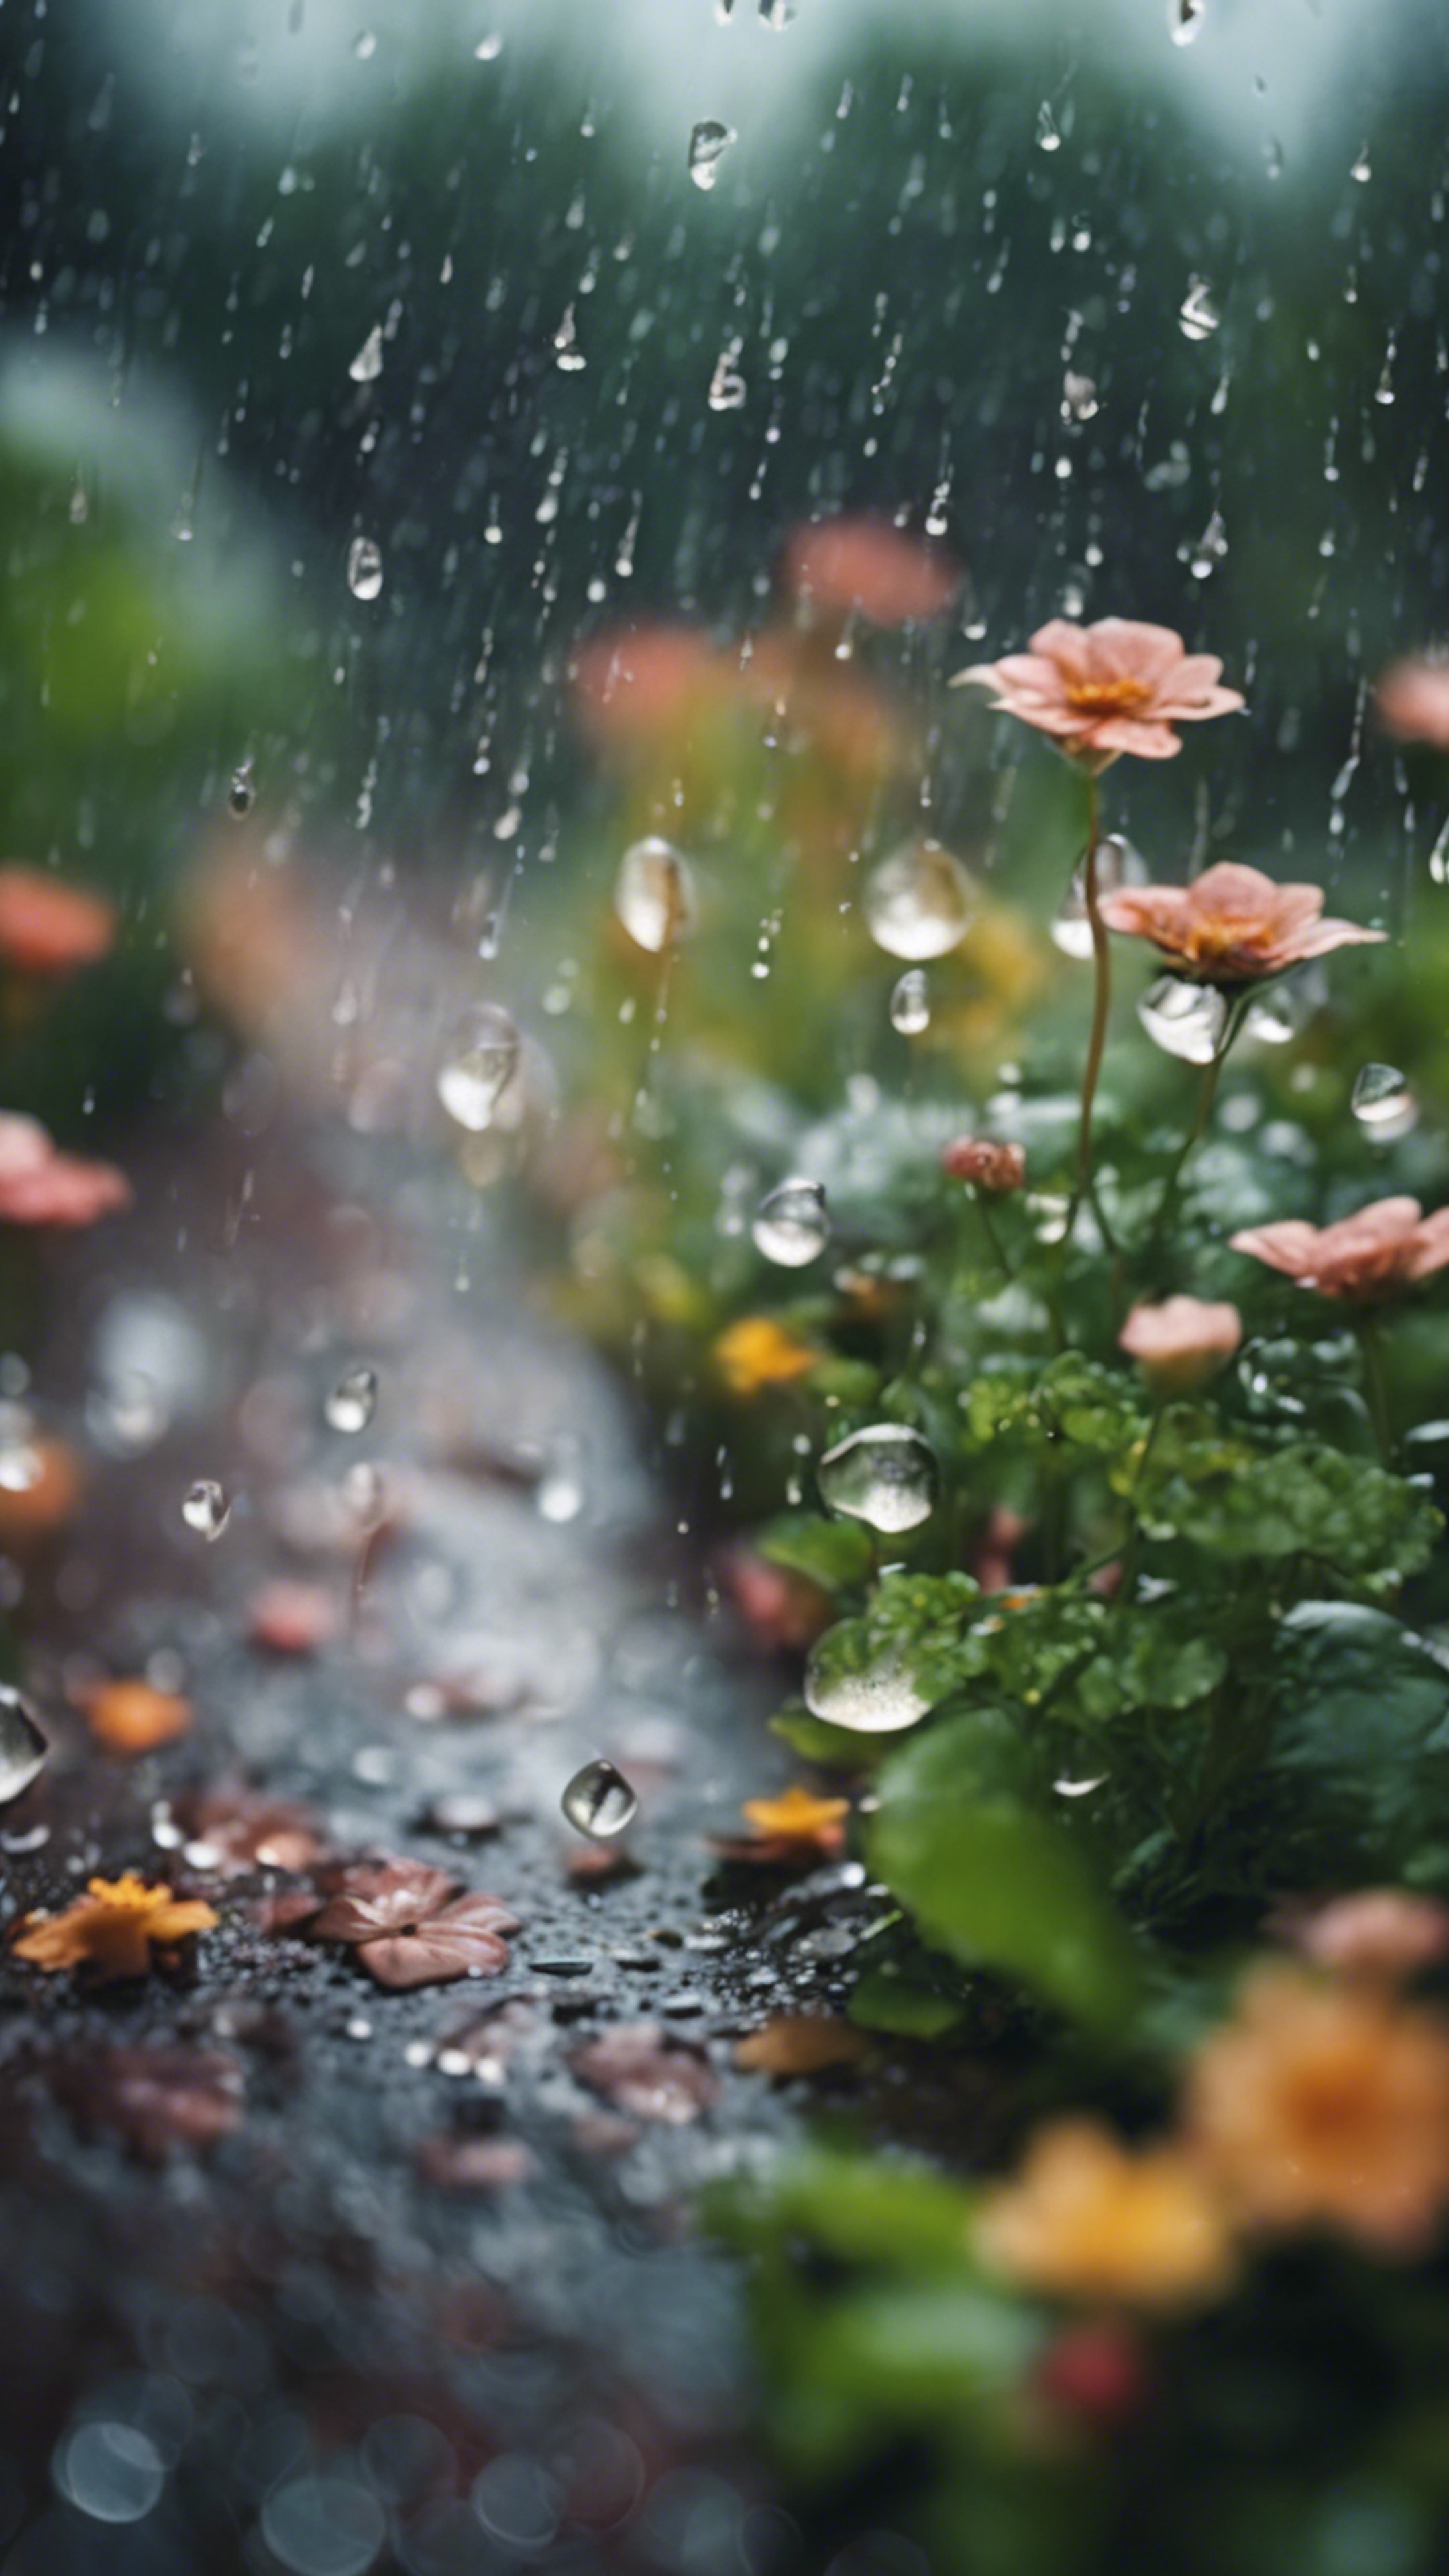 A tinkling rain garden during a soft rain shower, with raindrops dancing on the leaves and petals.壁紙[725596f4b8c5433598b7]